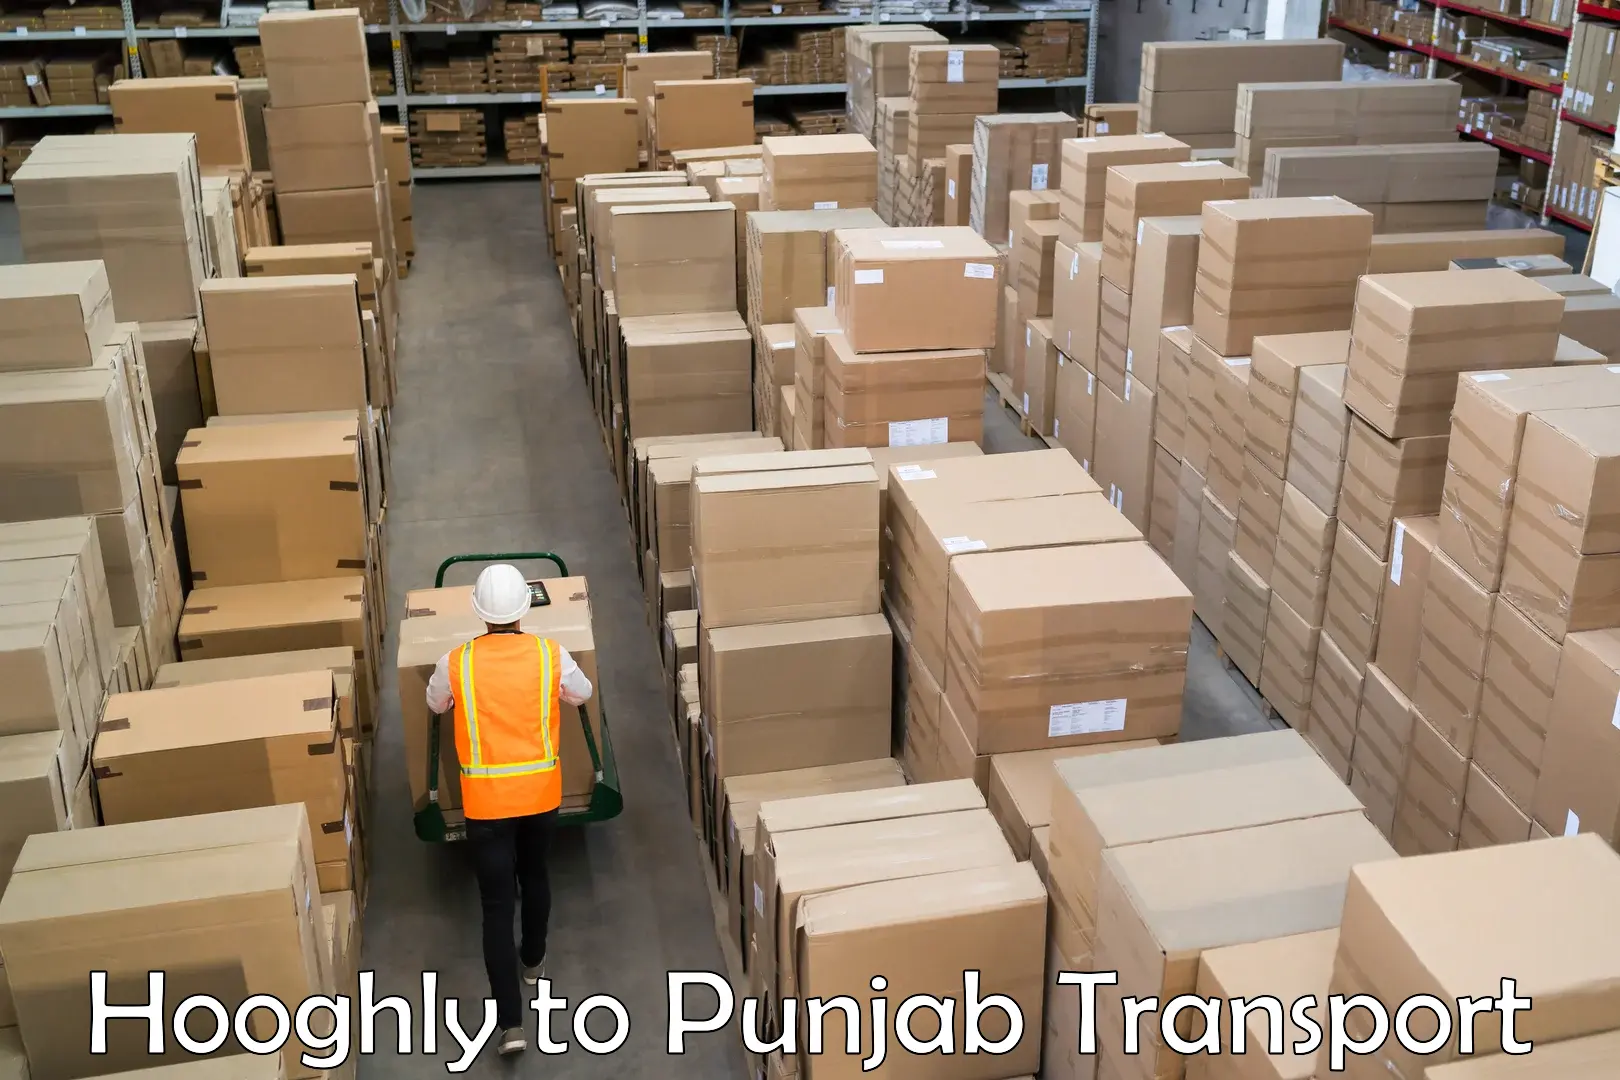 Cargo train transport services Hooghly to Ludhiana